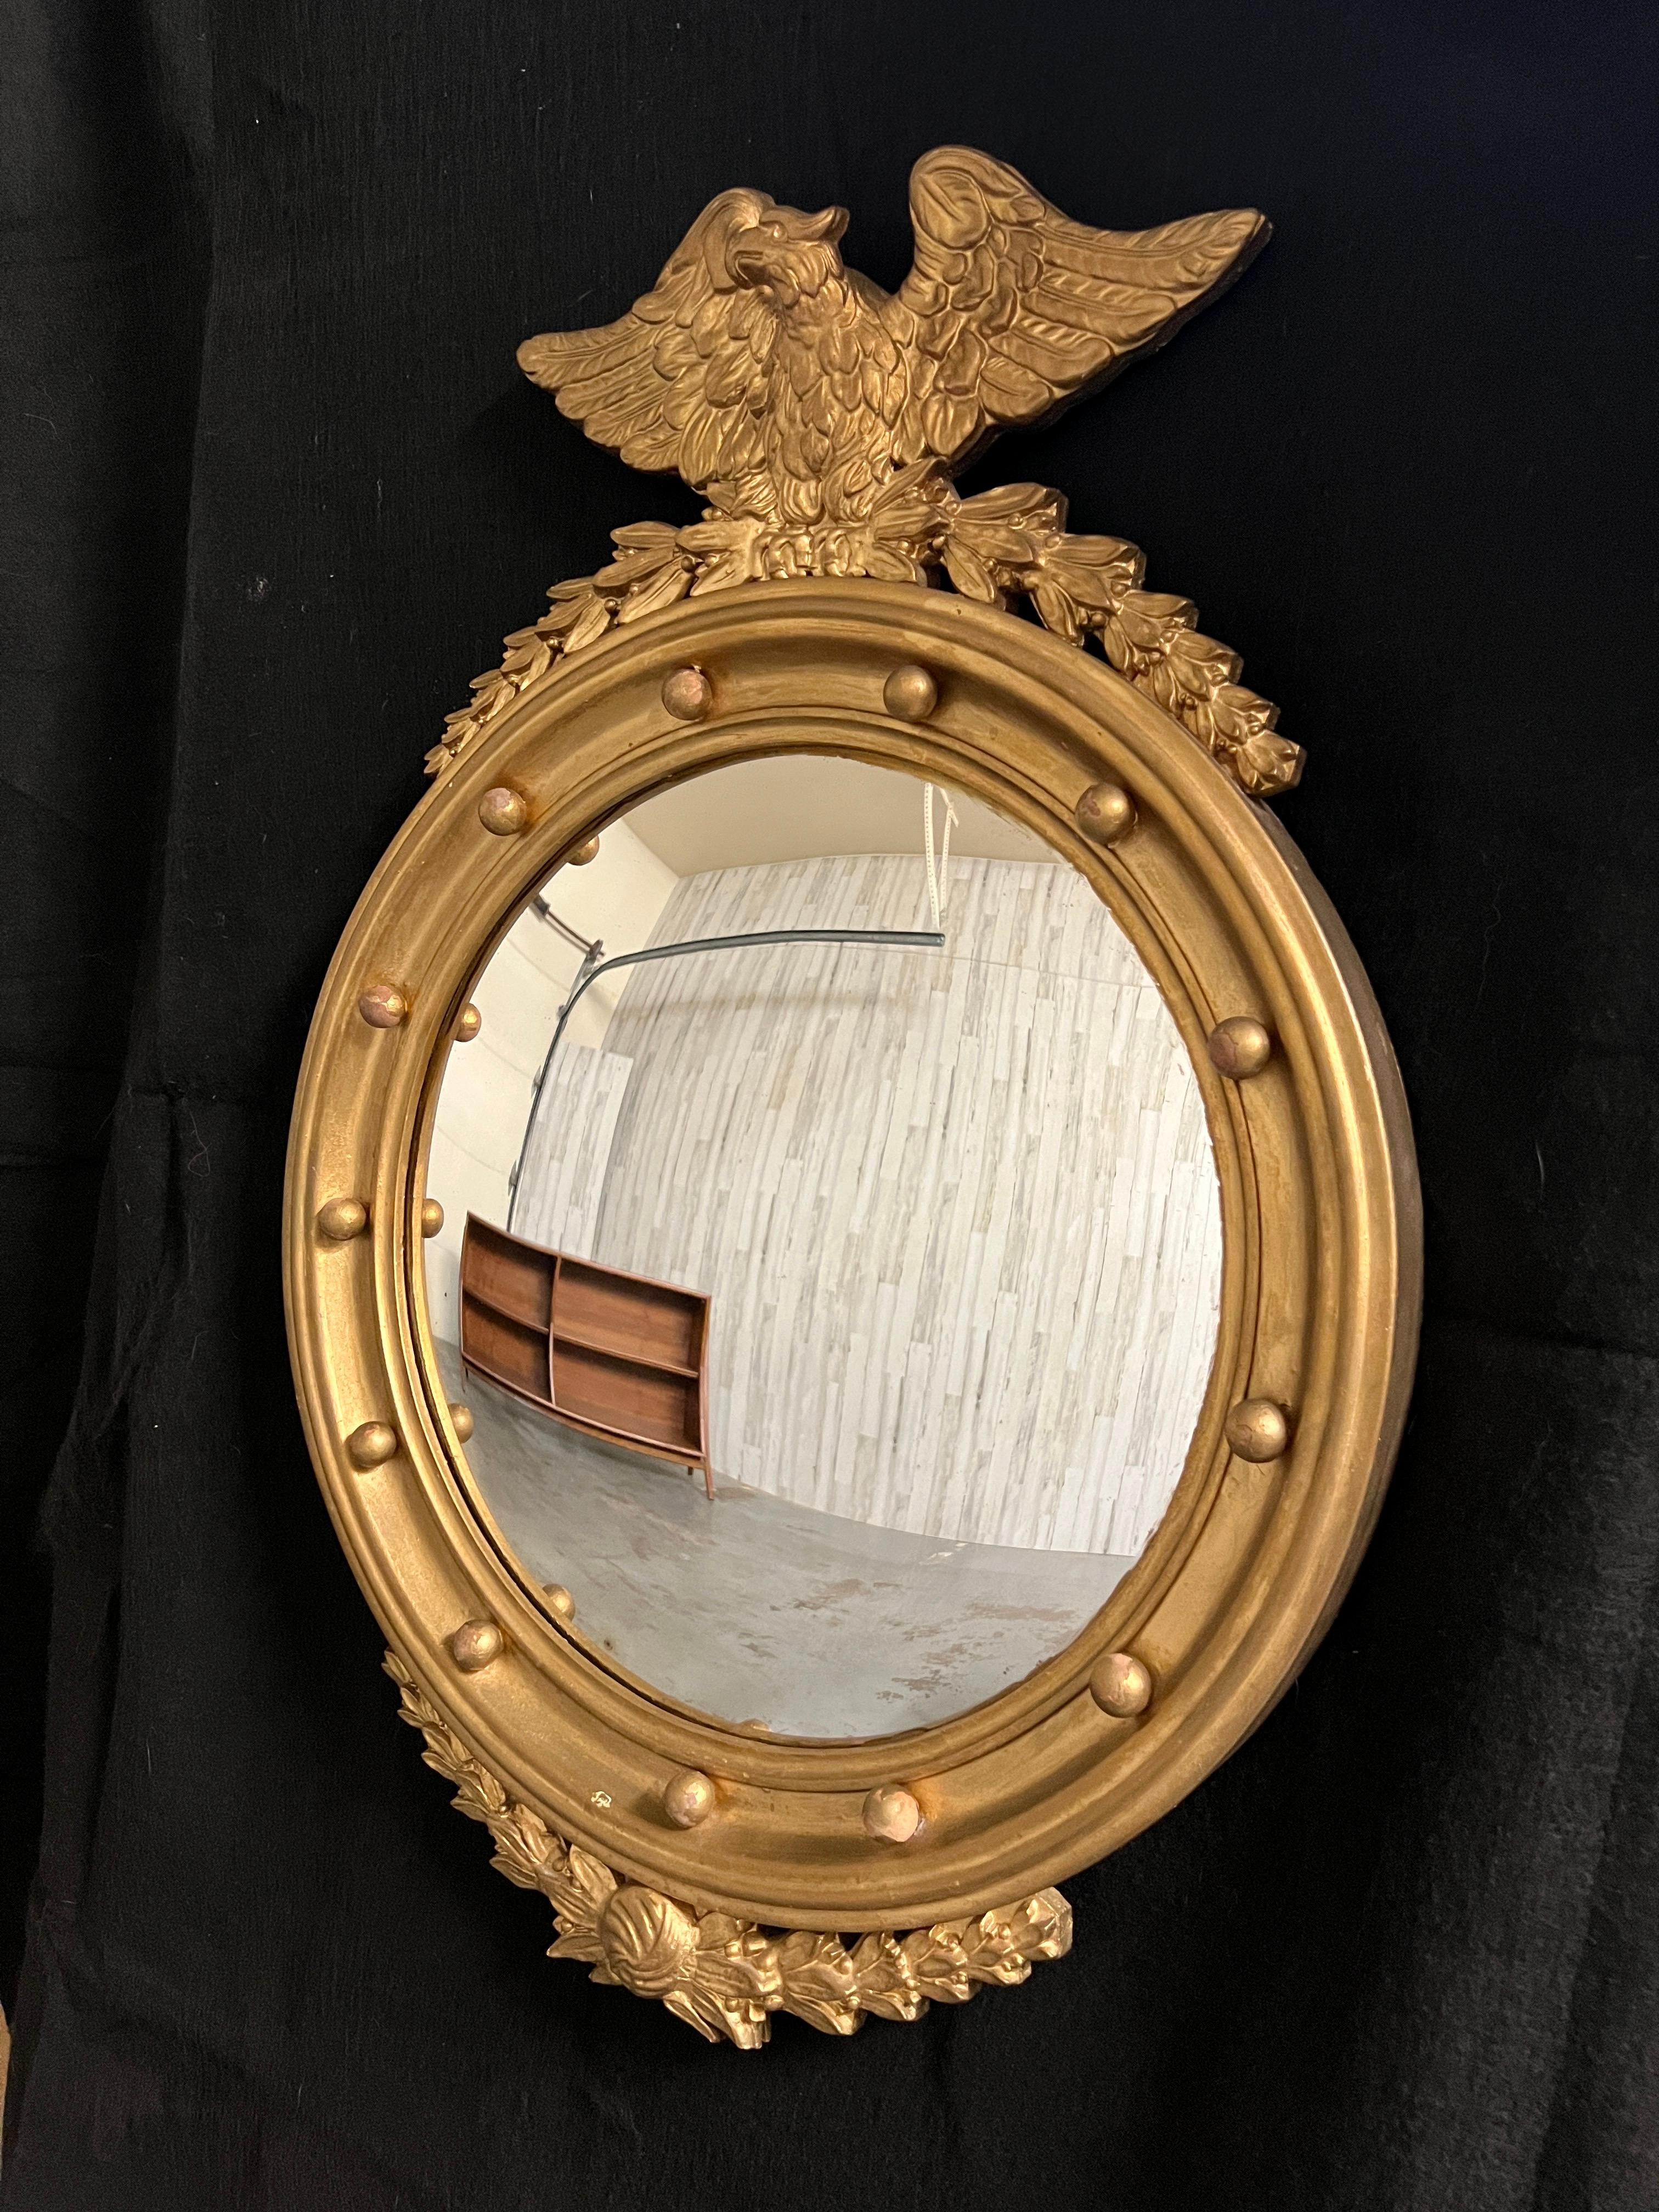 Carved wood with gesso and gold metal finish Regency style convex mirror.